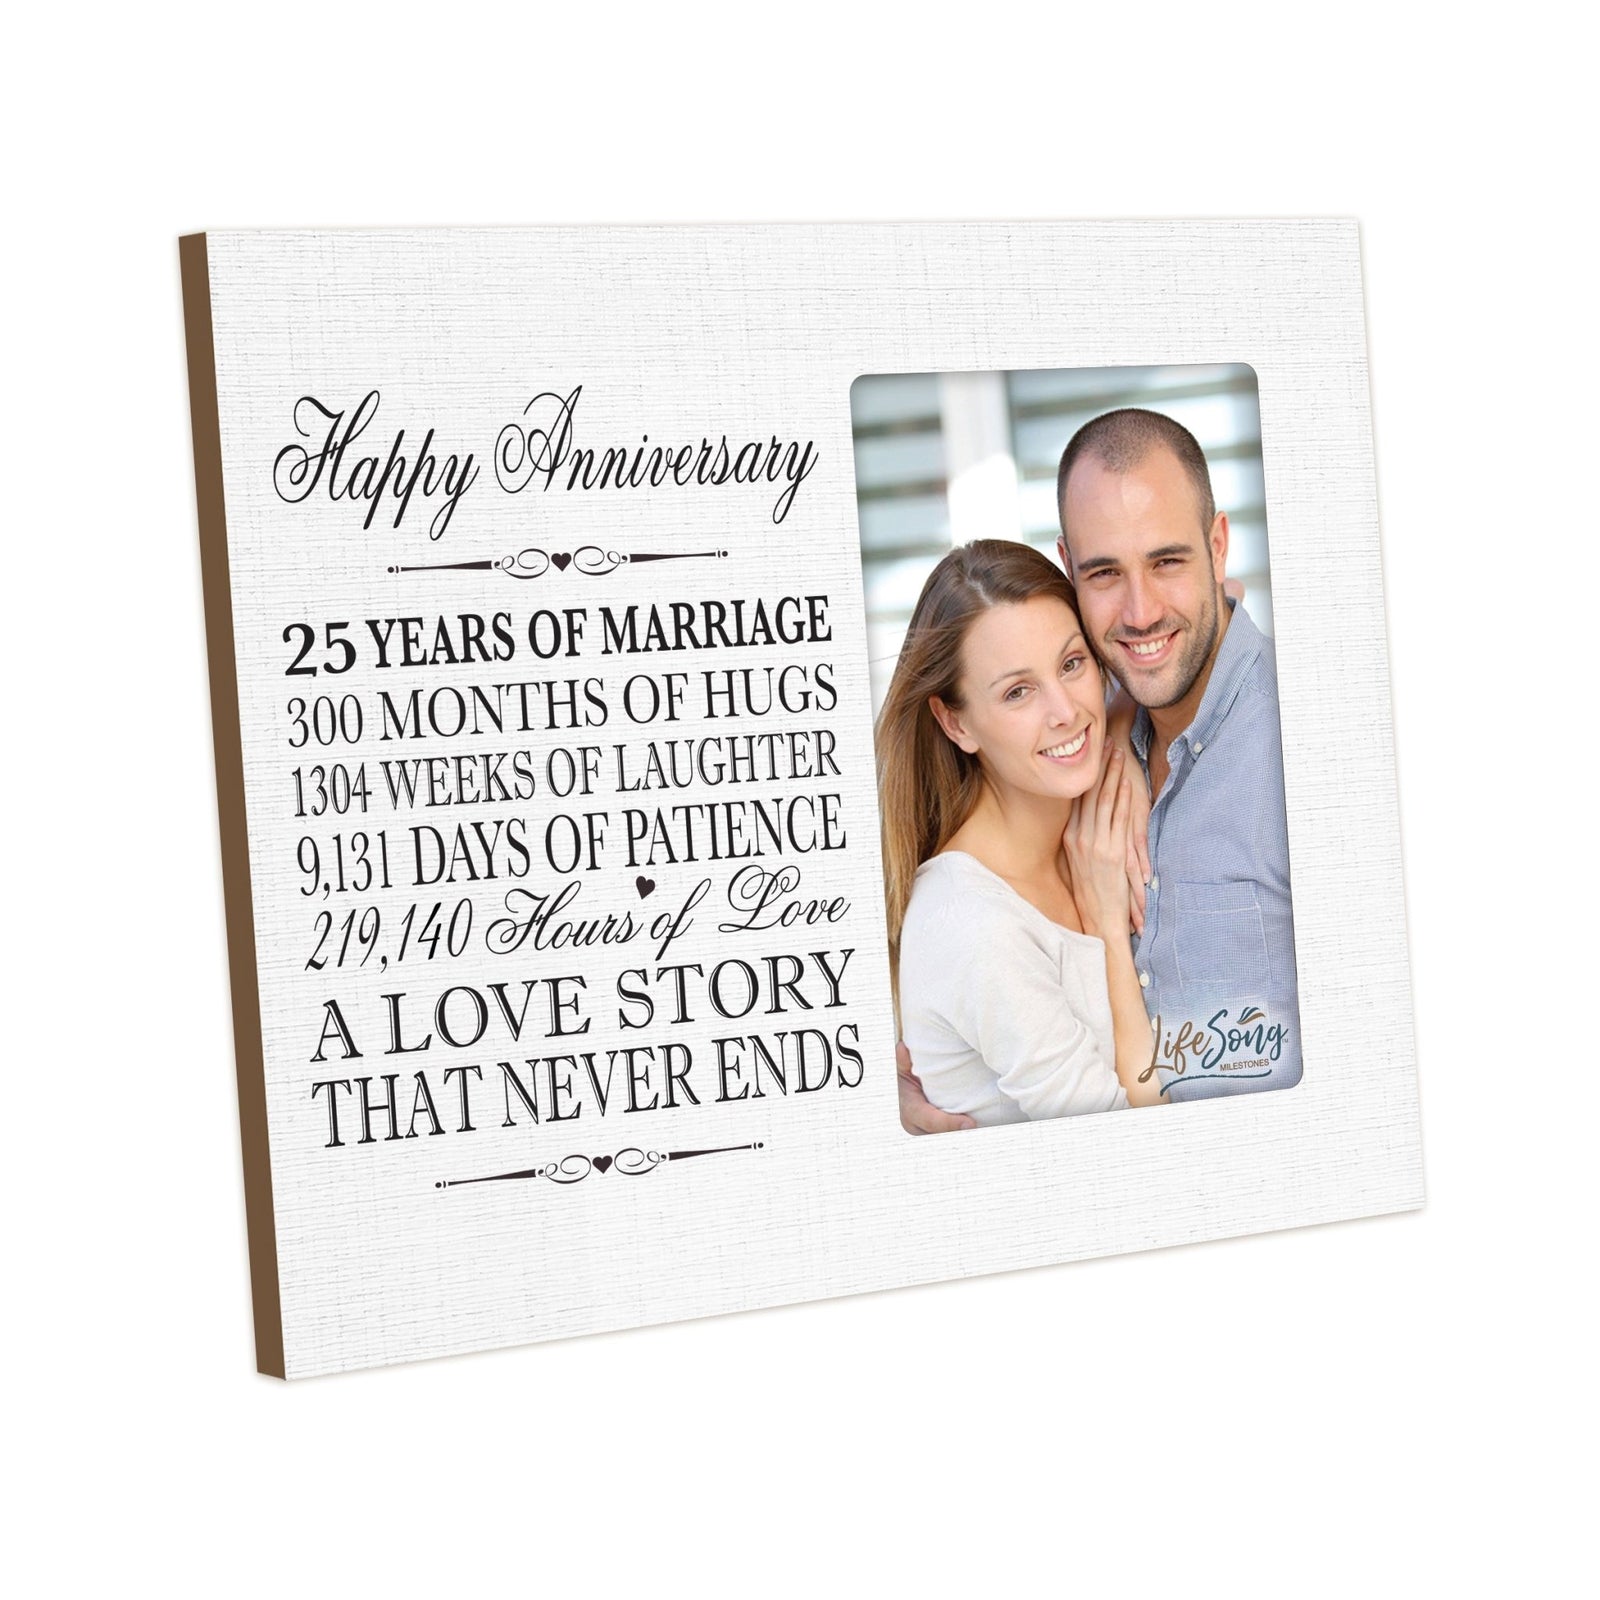 Couples Unique 25th Wedding Anniversary Photo Frame Decorations - A Love Story - LifeSong Milestones